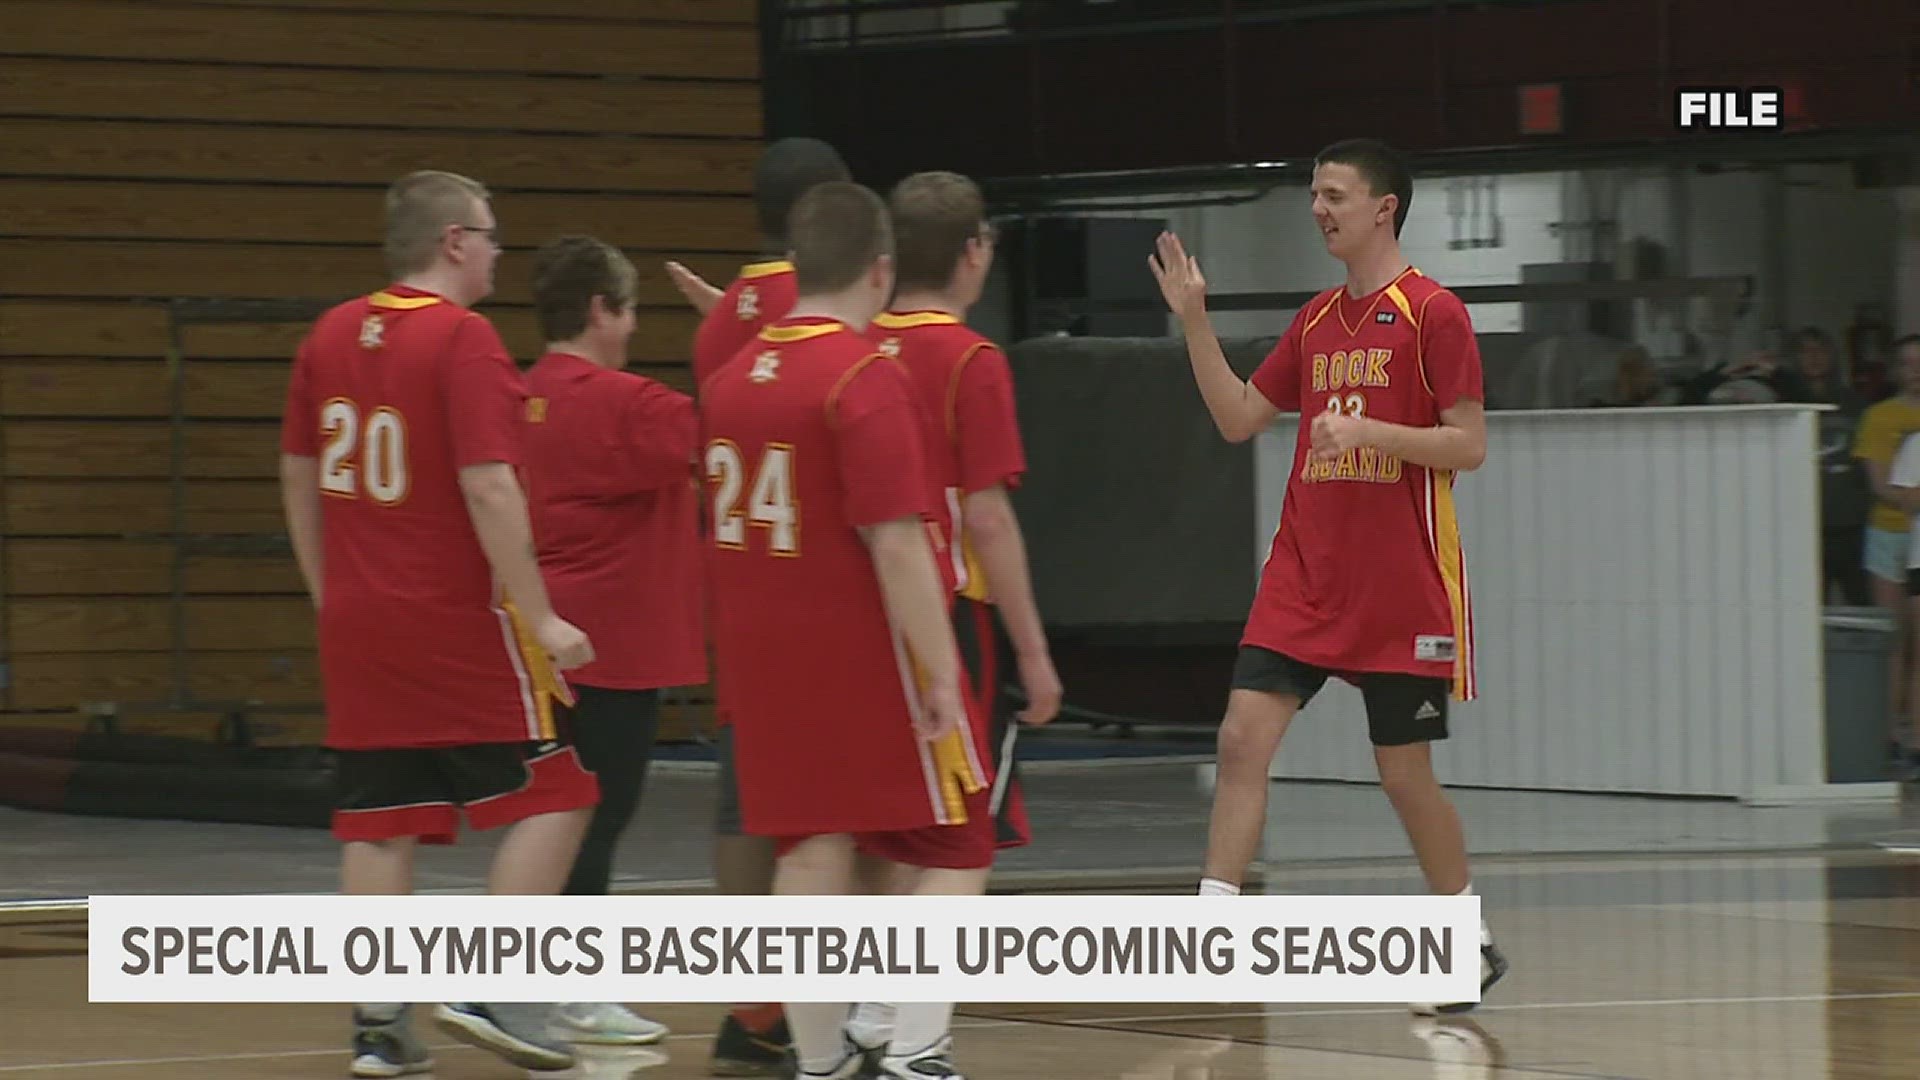 High school graduates in the Illinois Quad Cities can register to become a part of the Rock Island Special Olympics basketball team. Team practices are once a week.